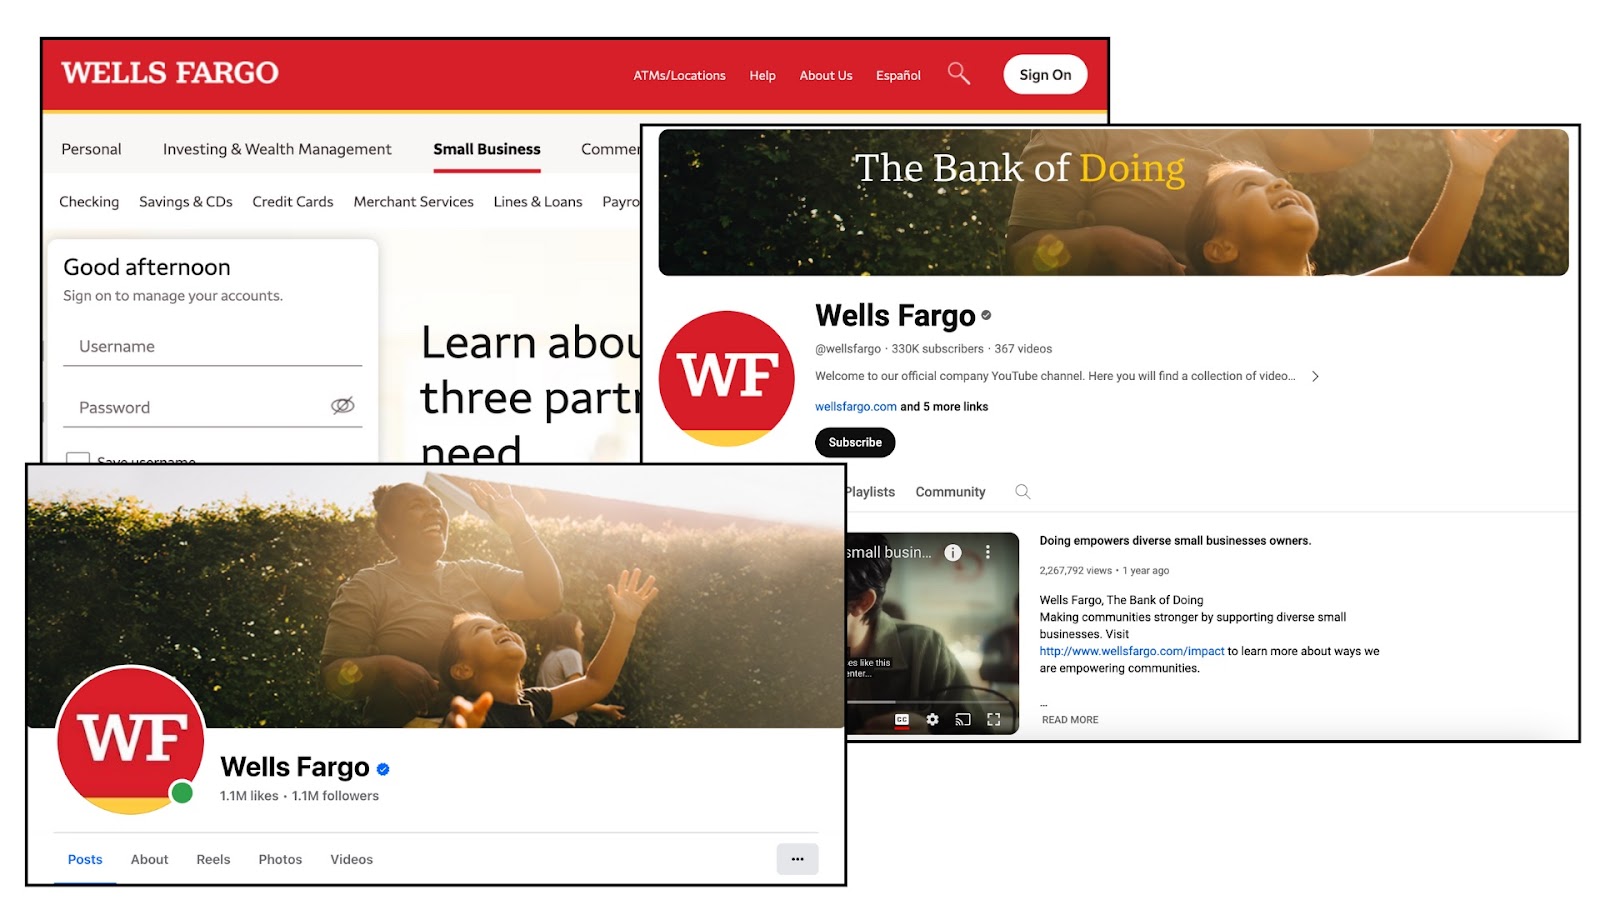 wells fargo website, facebook profile, and youtube leafage   with accordant  branding